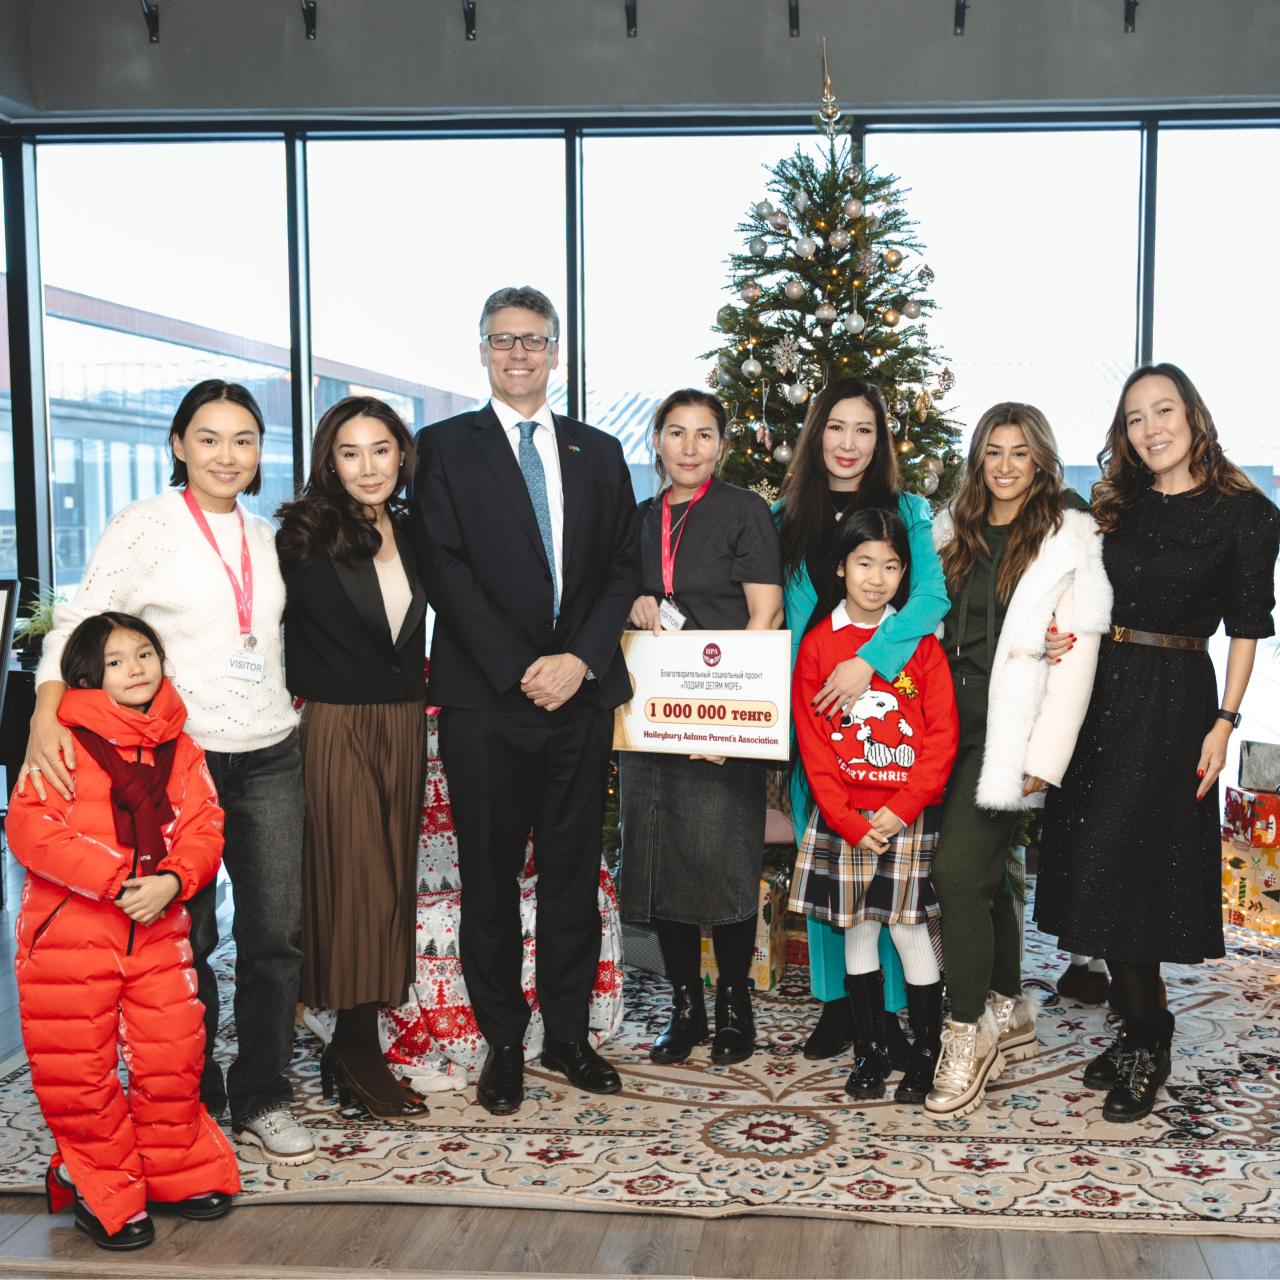 Haileybury Astana's Charitable Expansions: Making a Positive Impact Together